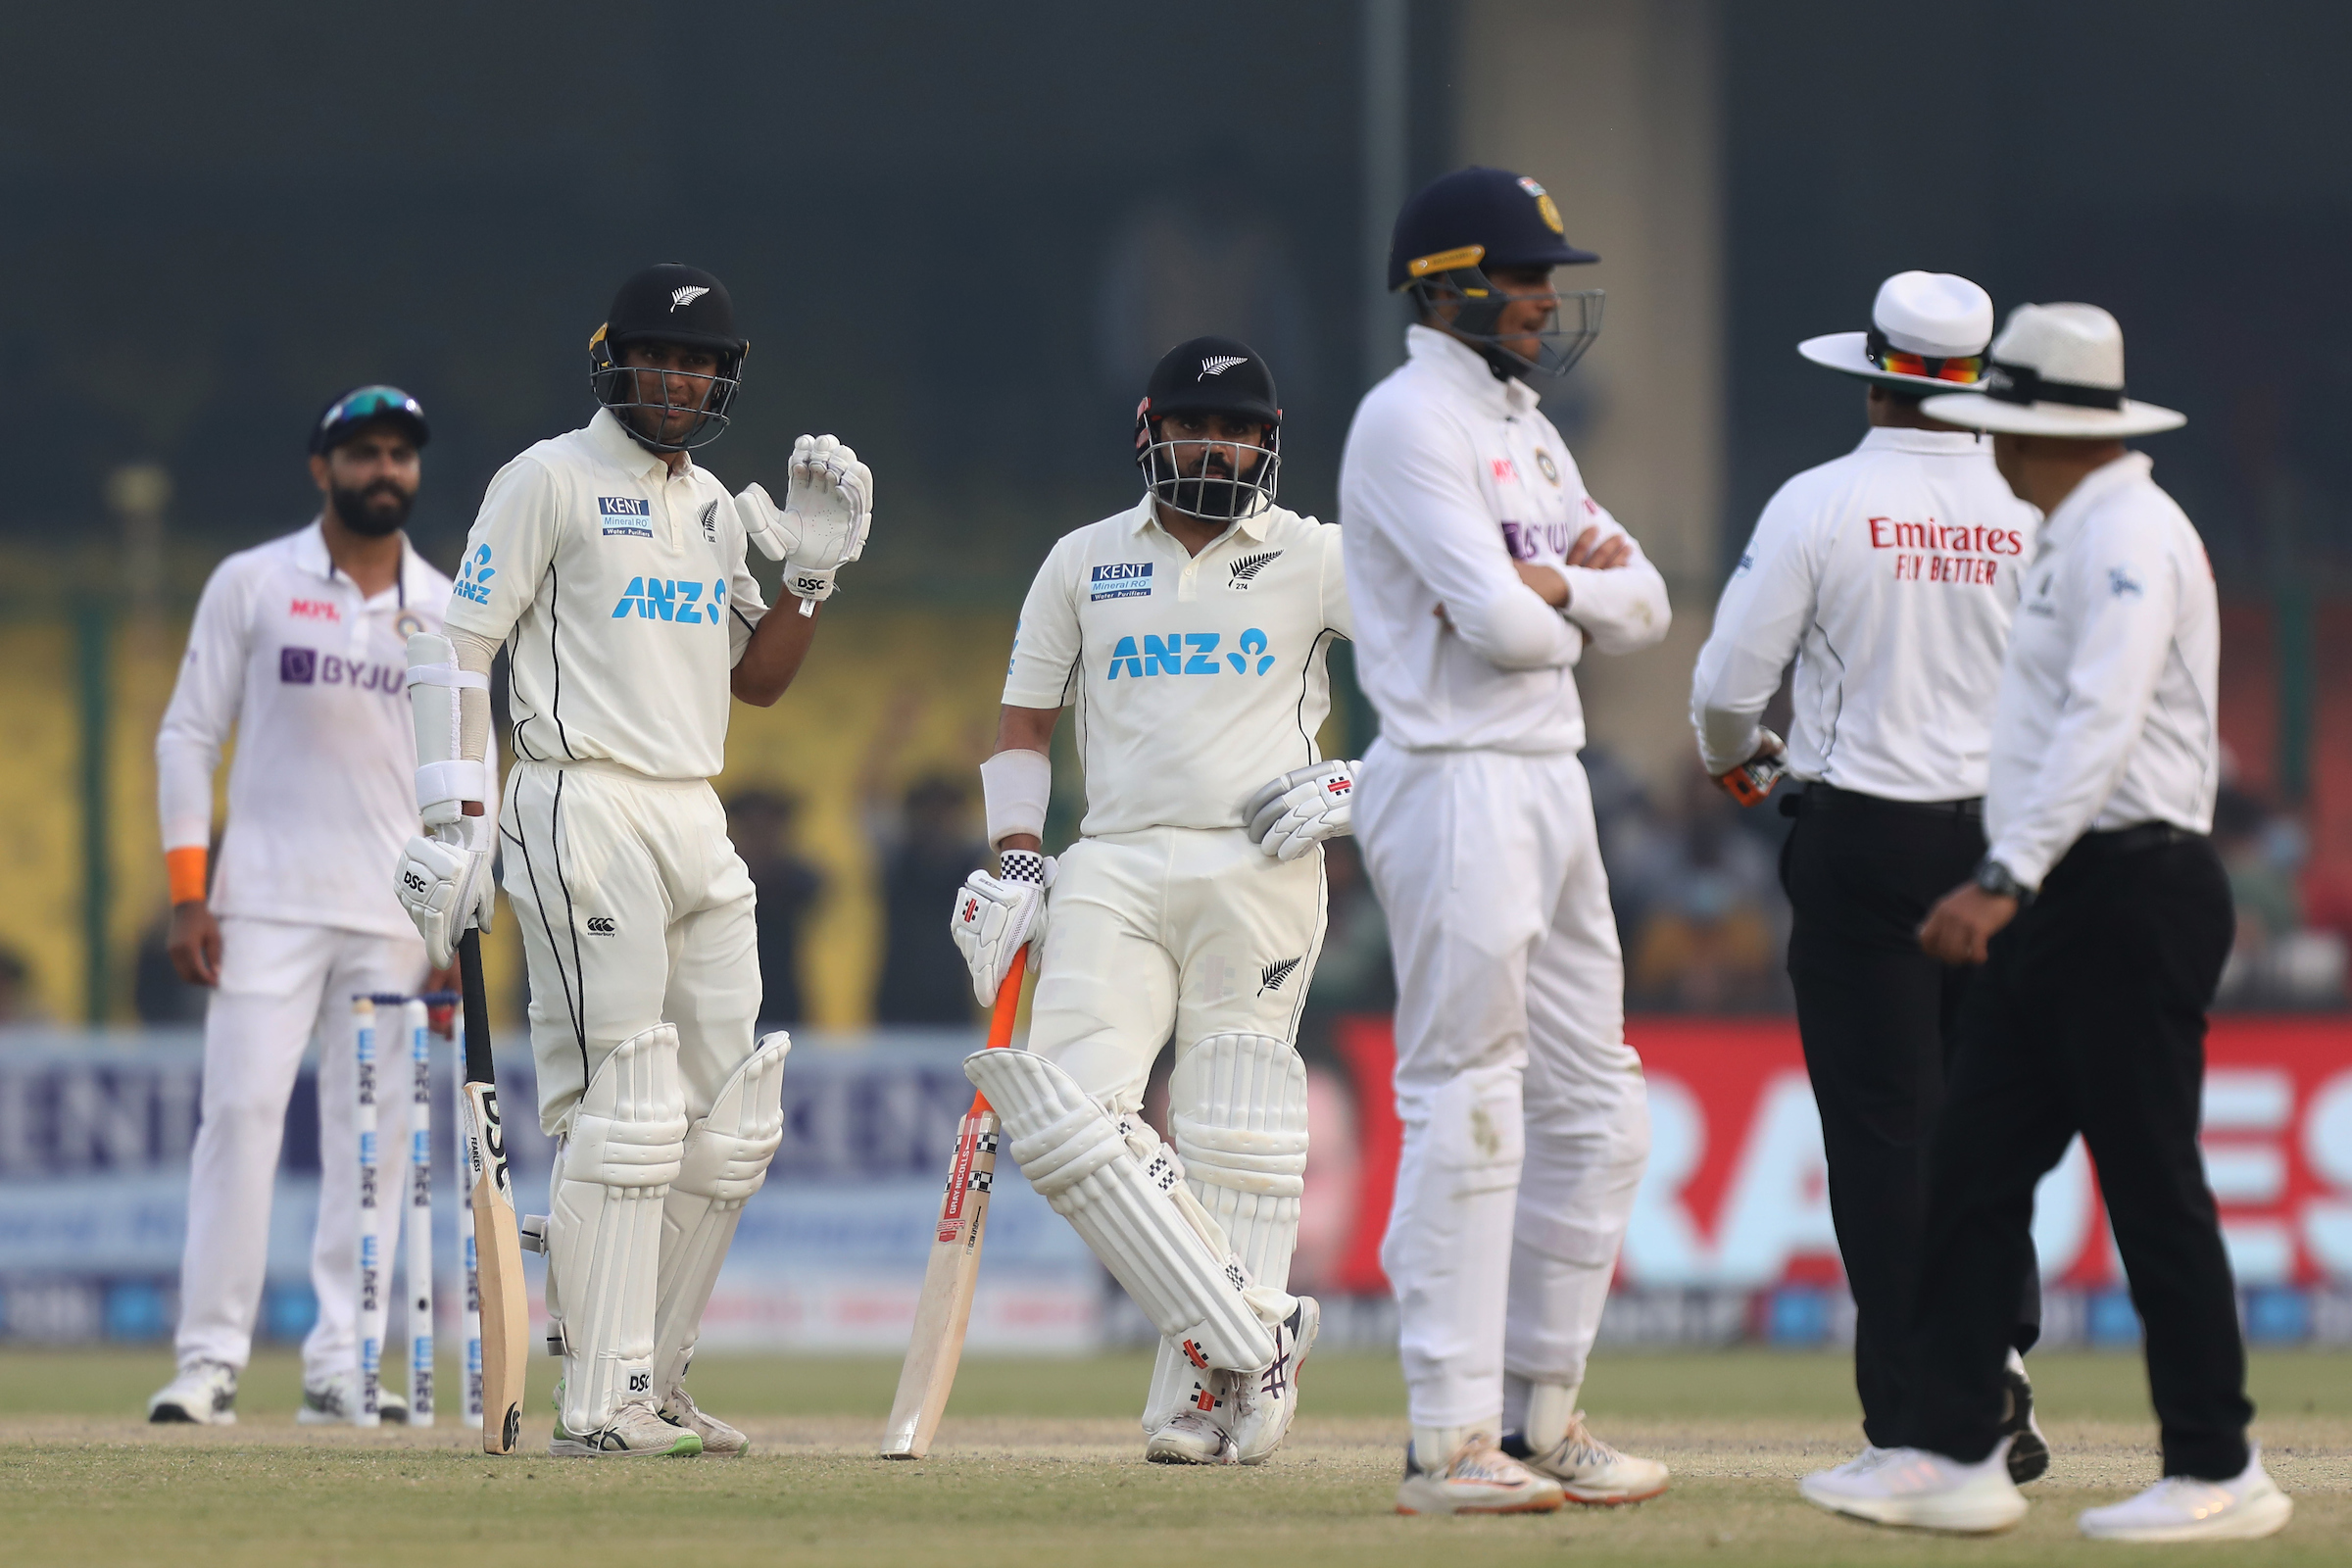  To Survive 52 Balls On Day 5 Was Commendable: Tendulkar Hails New Zealand